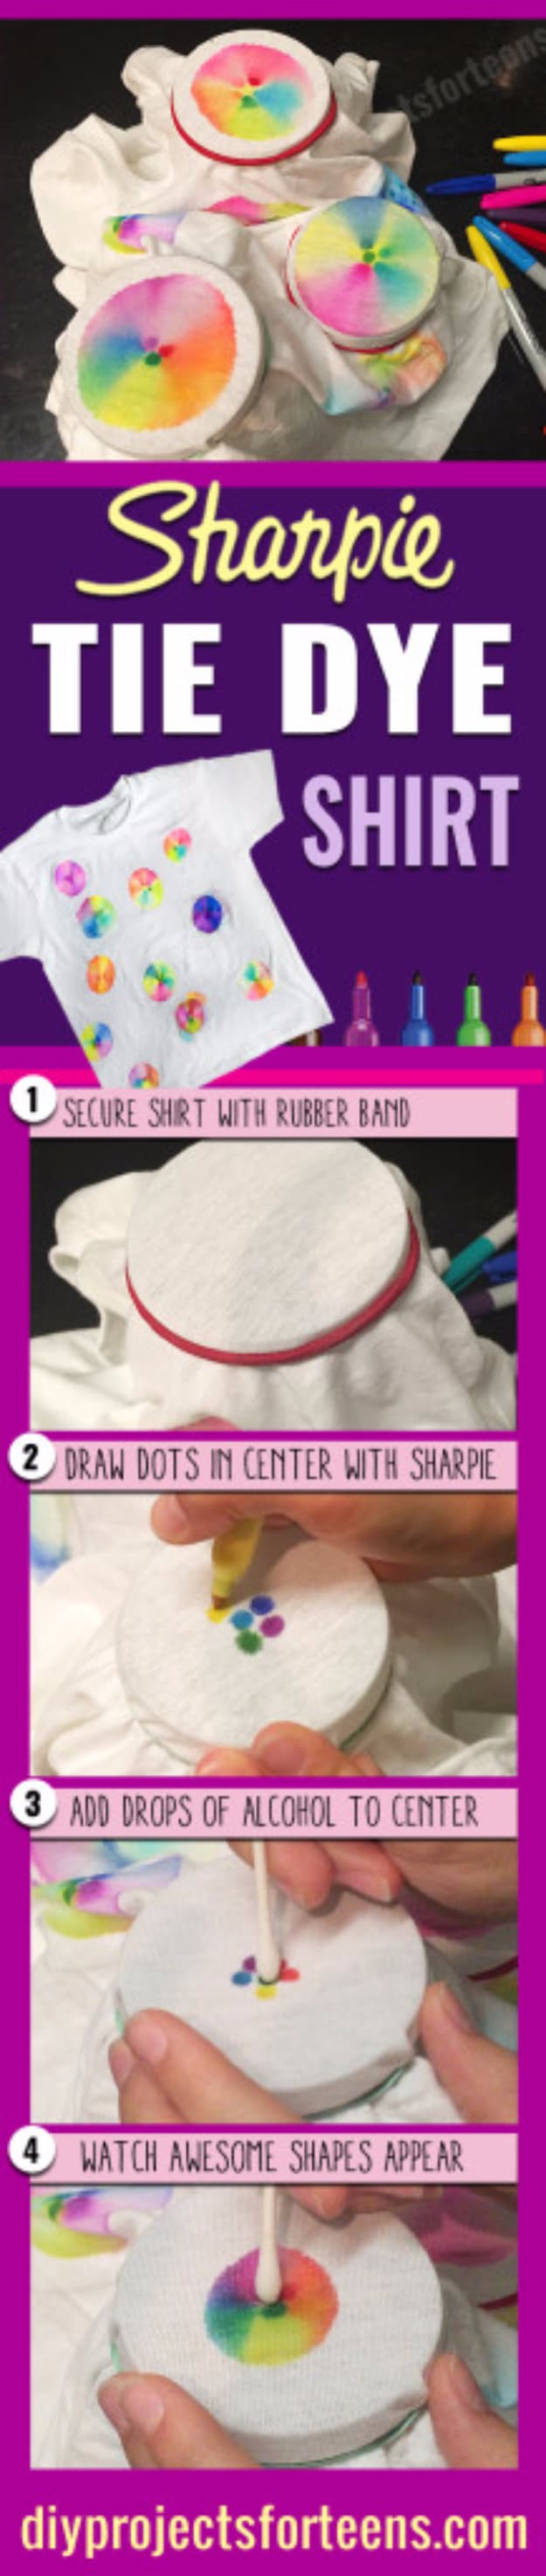 DIY Projects for Teenagers - Sharpie Tie Dye T-Shirt - Cool Teen Crafts Ideas for Bedroom Decor, Gifts, Clothes and Fun Room Organization. Summer and Awesome School Stuff 